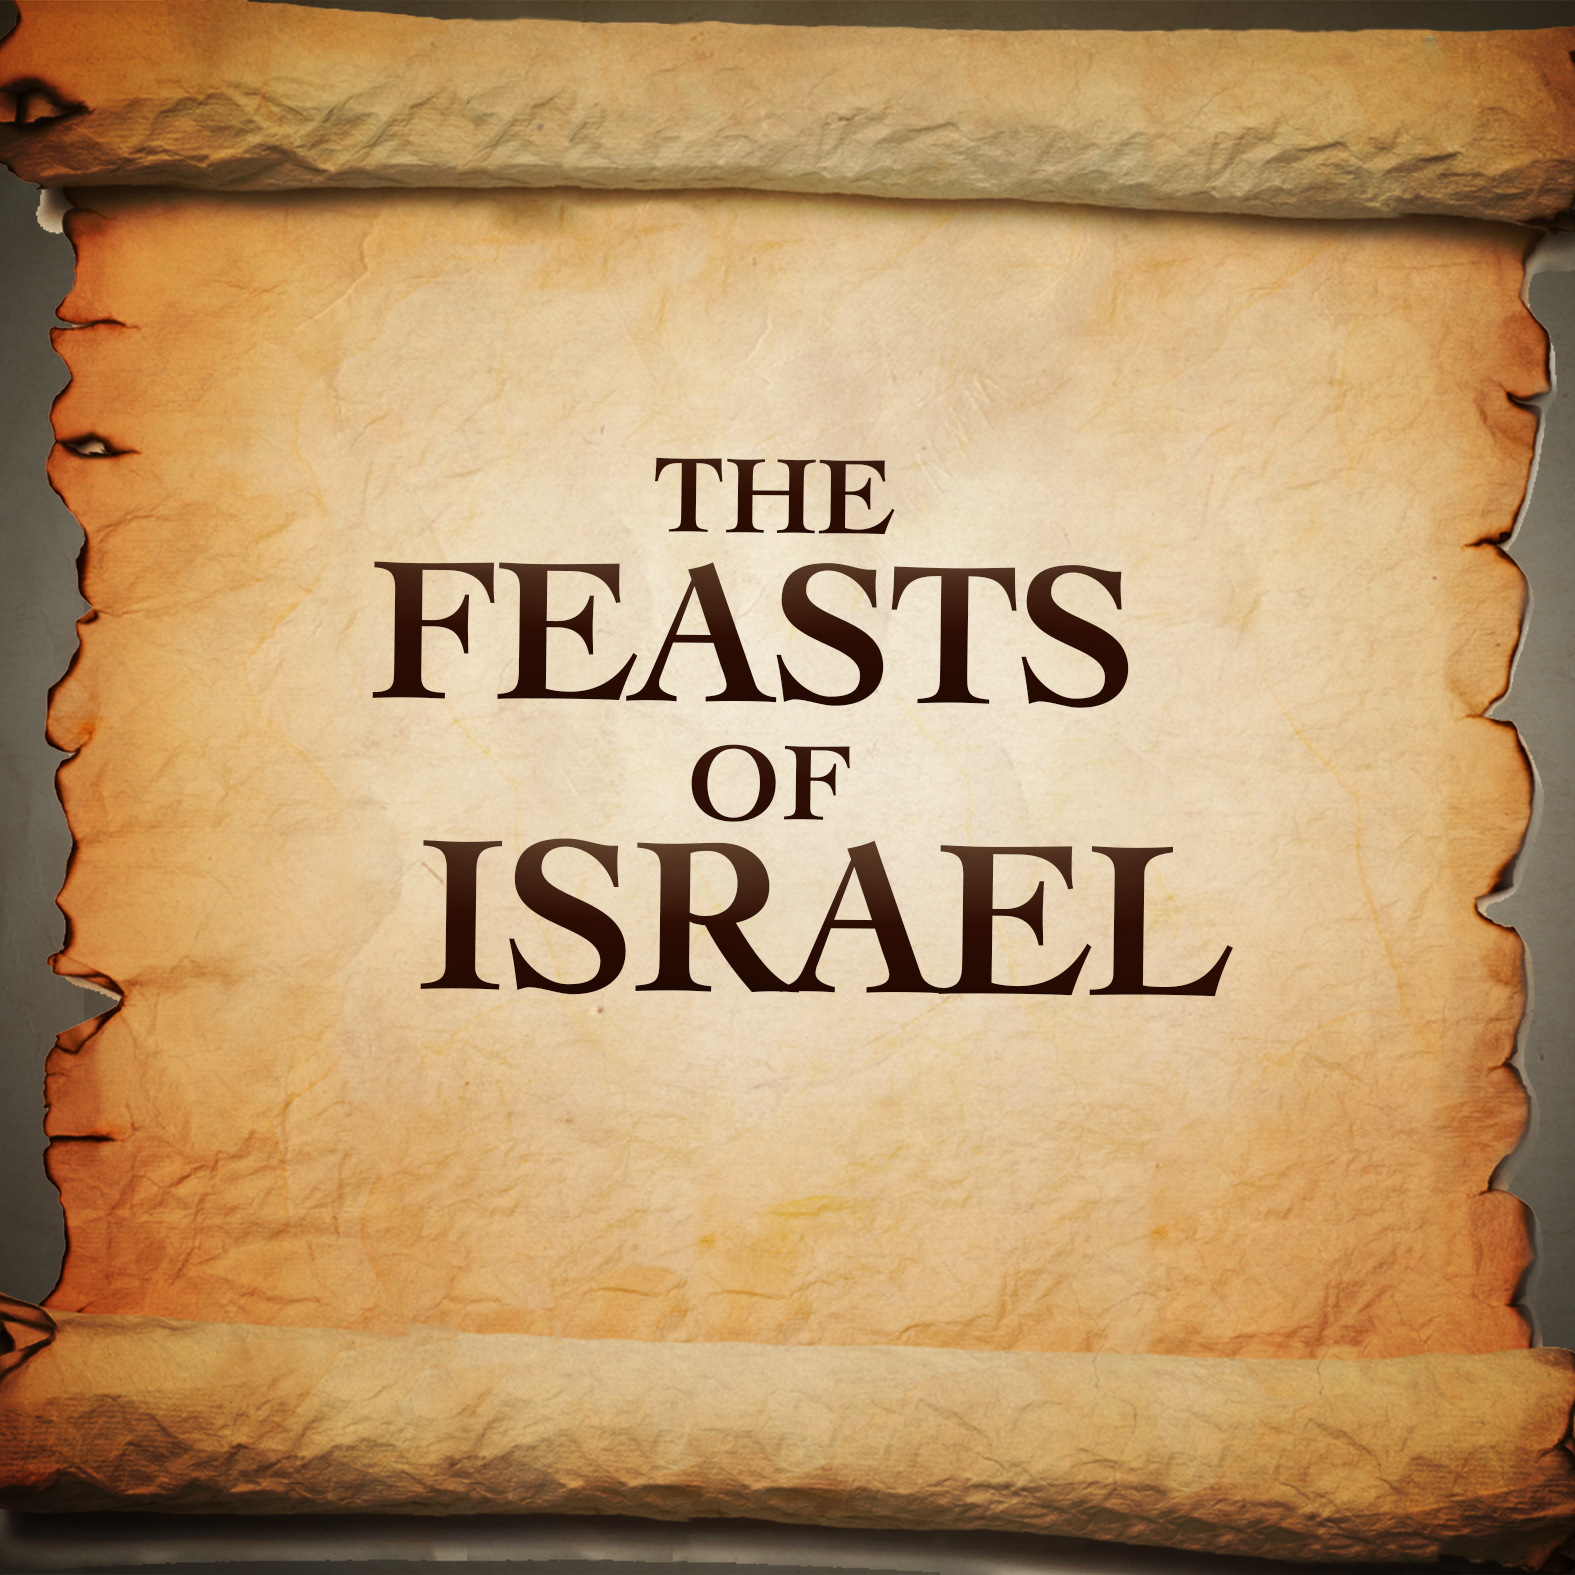 The Feasts of Israel, Part 4 - Unleavened Bread and First Fruits Image